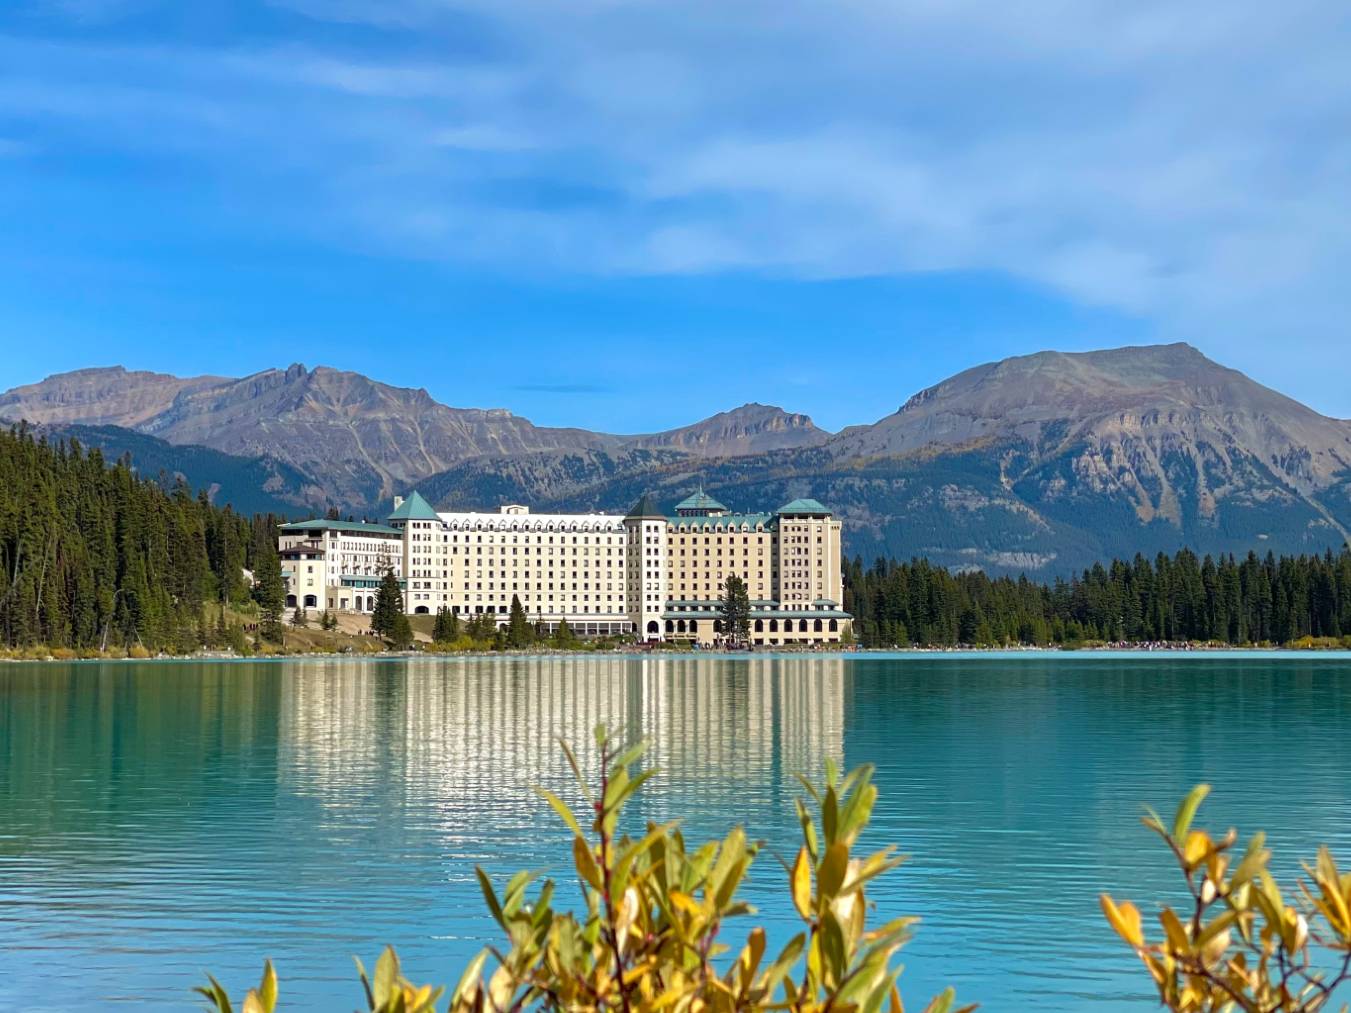 5-Day Fairmont Chateau Lake Louise Experience of Canadian Rockies Tour